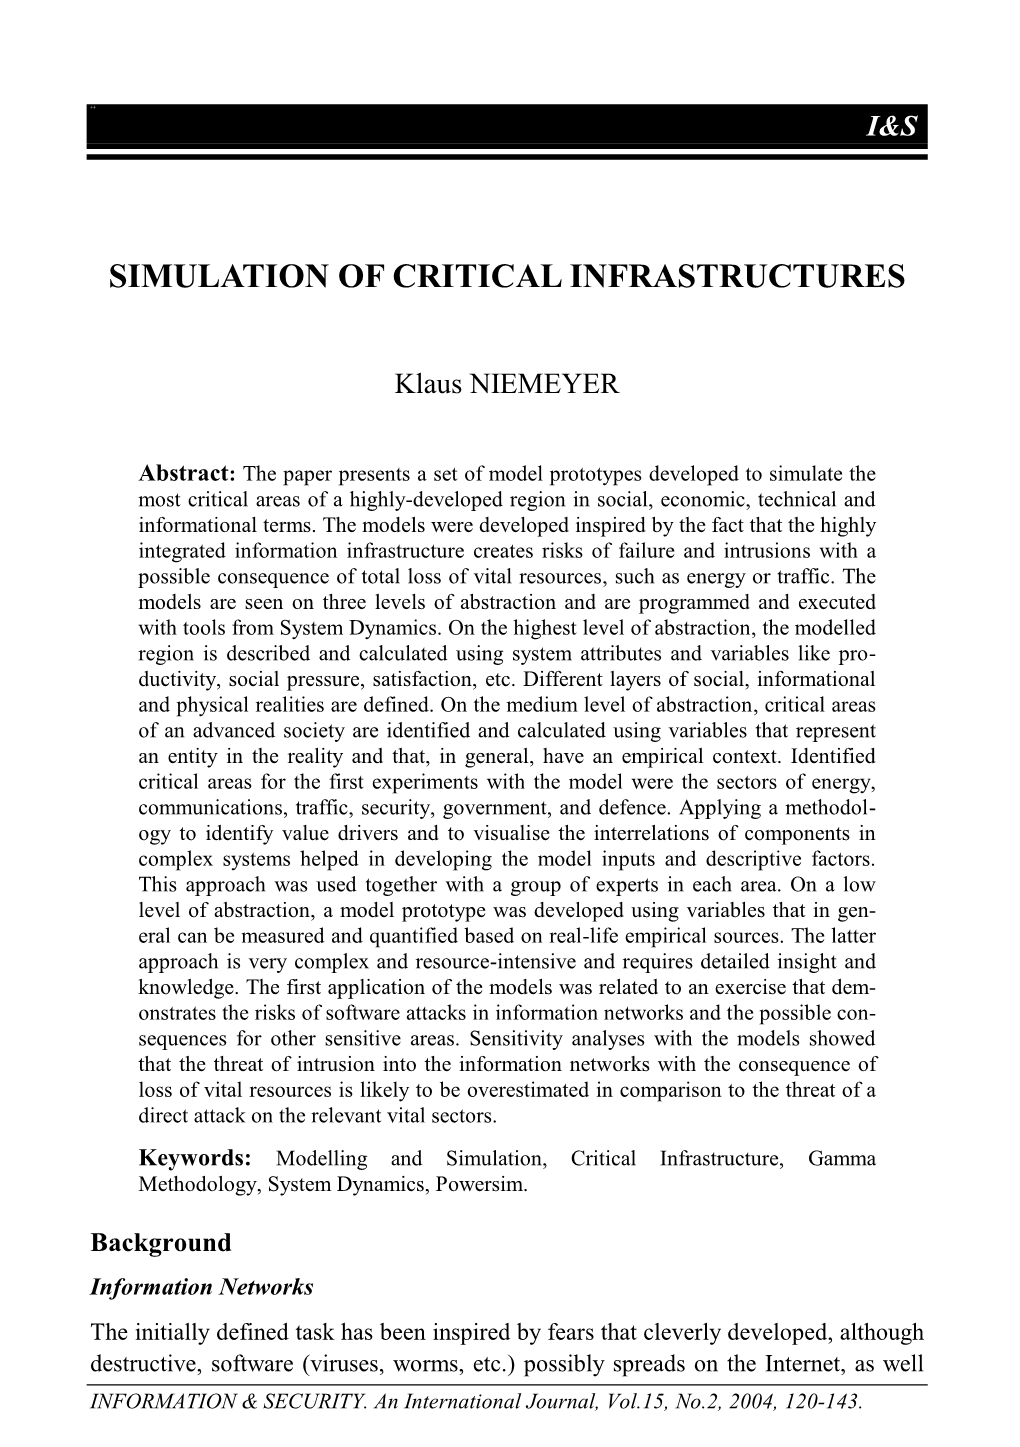 Simulation of Critical Infrastructures